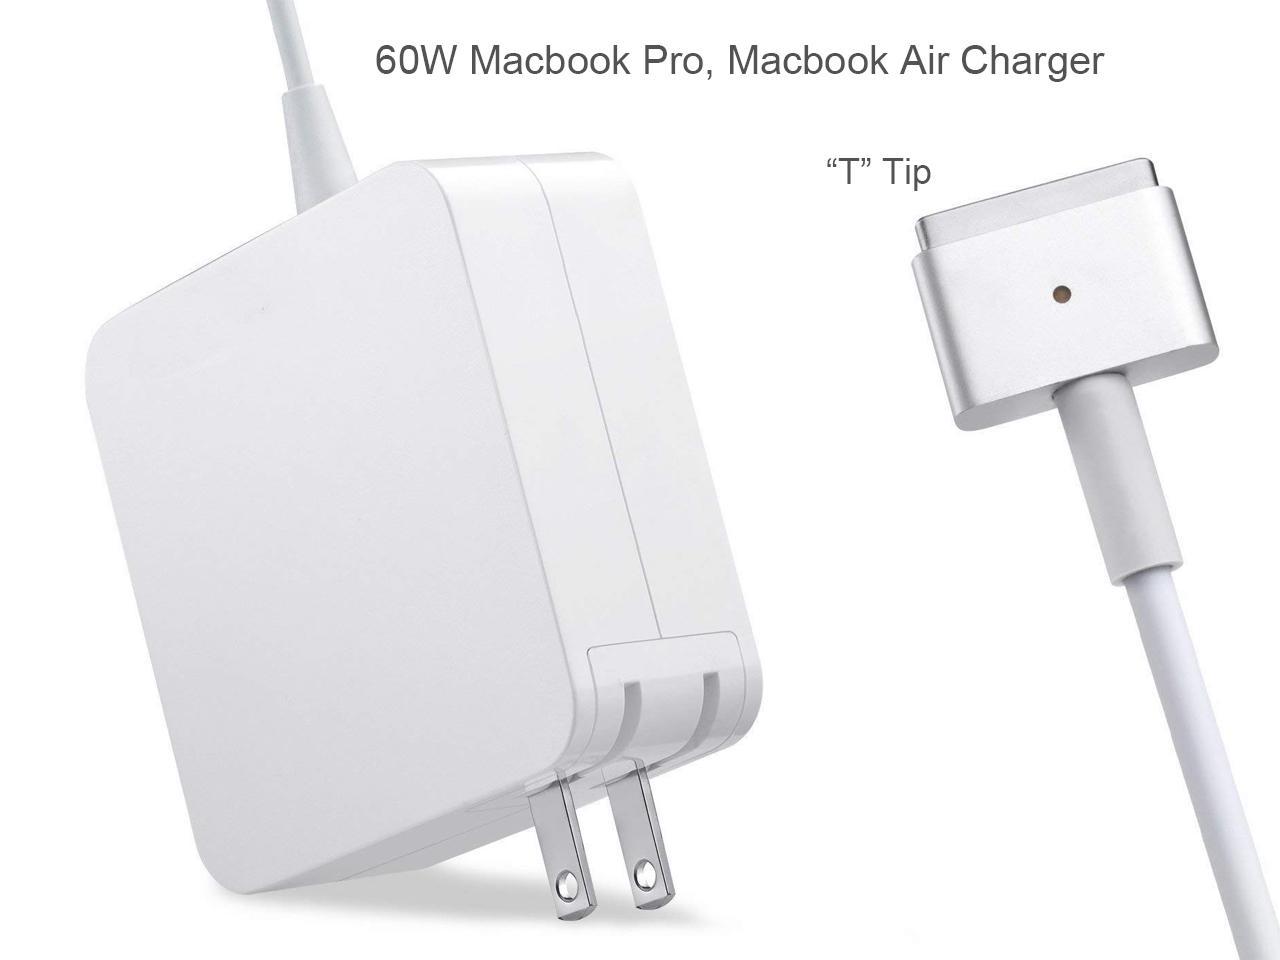 Compatible with MacBook Pro Charger,60w Magsafe L-tip Power Adapter Charger Replacement for MacBook Pro 11-inch 13-inch Before 2012